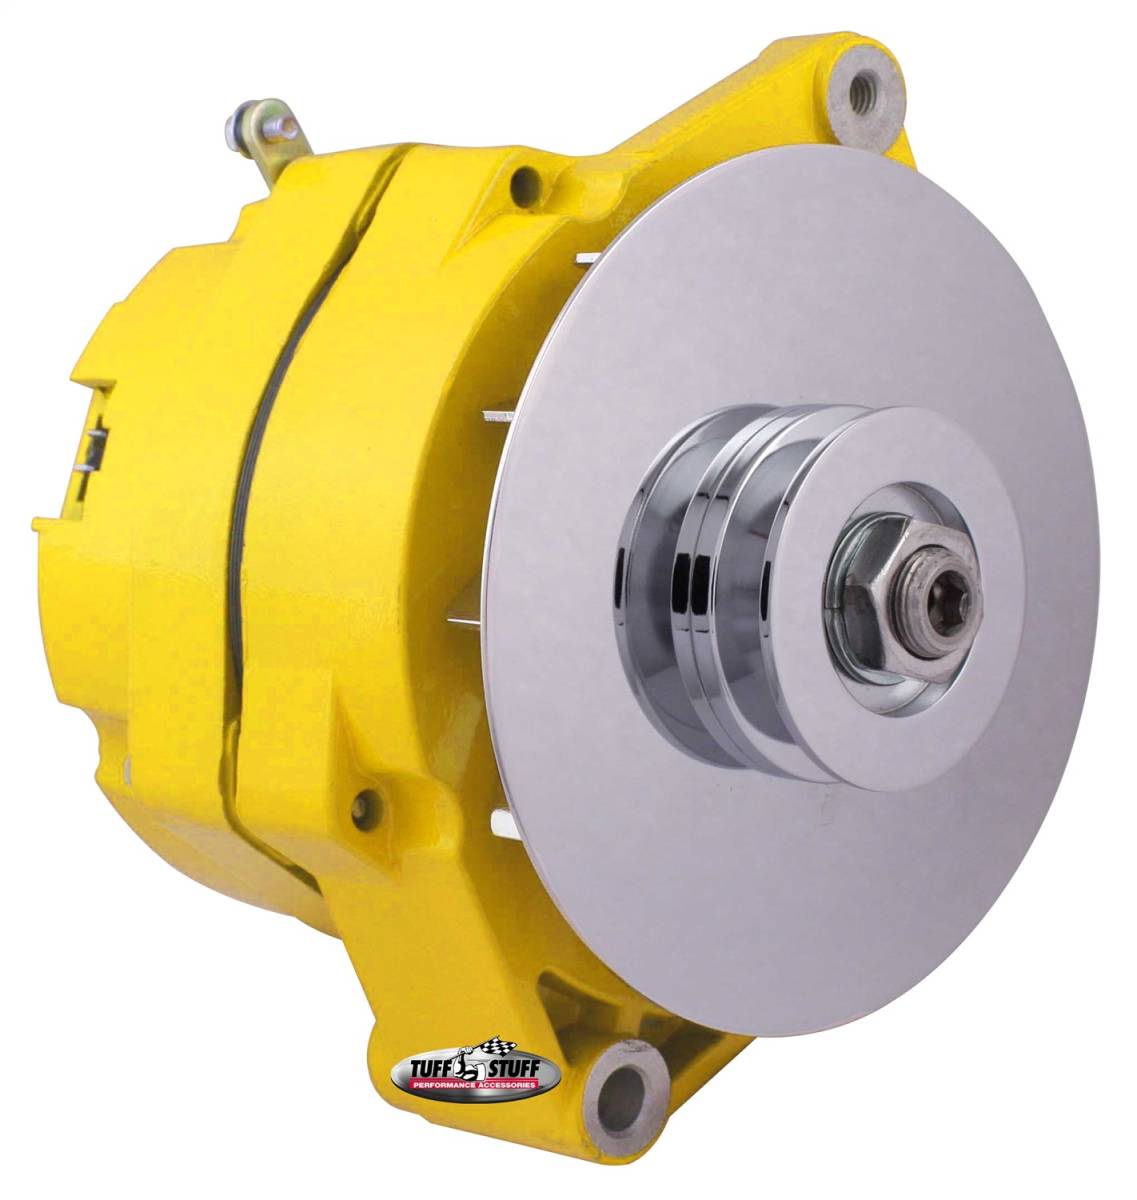 Tuff Stuff Performance - Alternator 80 AMP OEM Wire 10si Case V Groove Pulley External Regulator Yellow Powdercoat w/Chrome Accents Must Be Used With An External Solid State Voltage Regulator 7102NFYELLOW